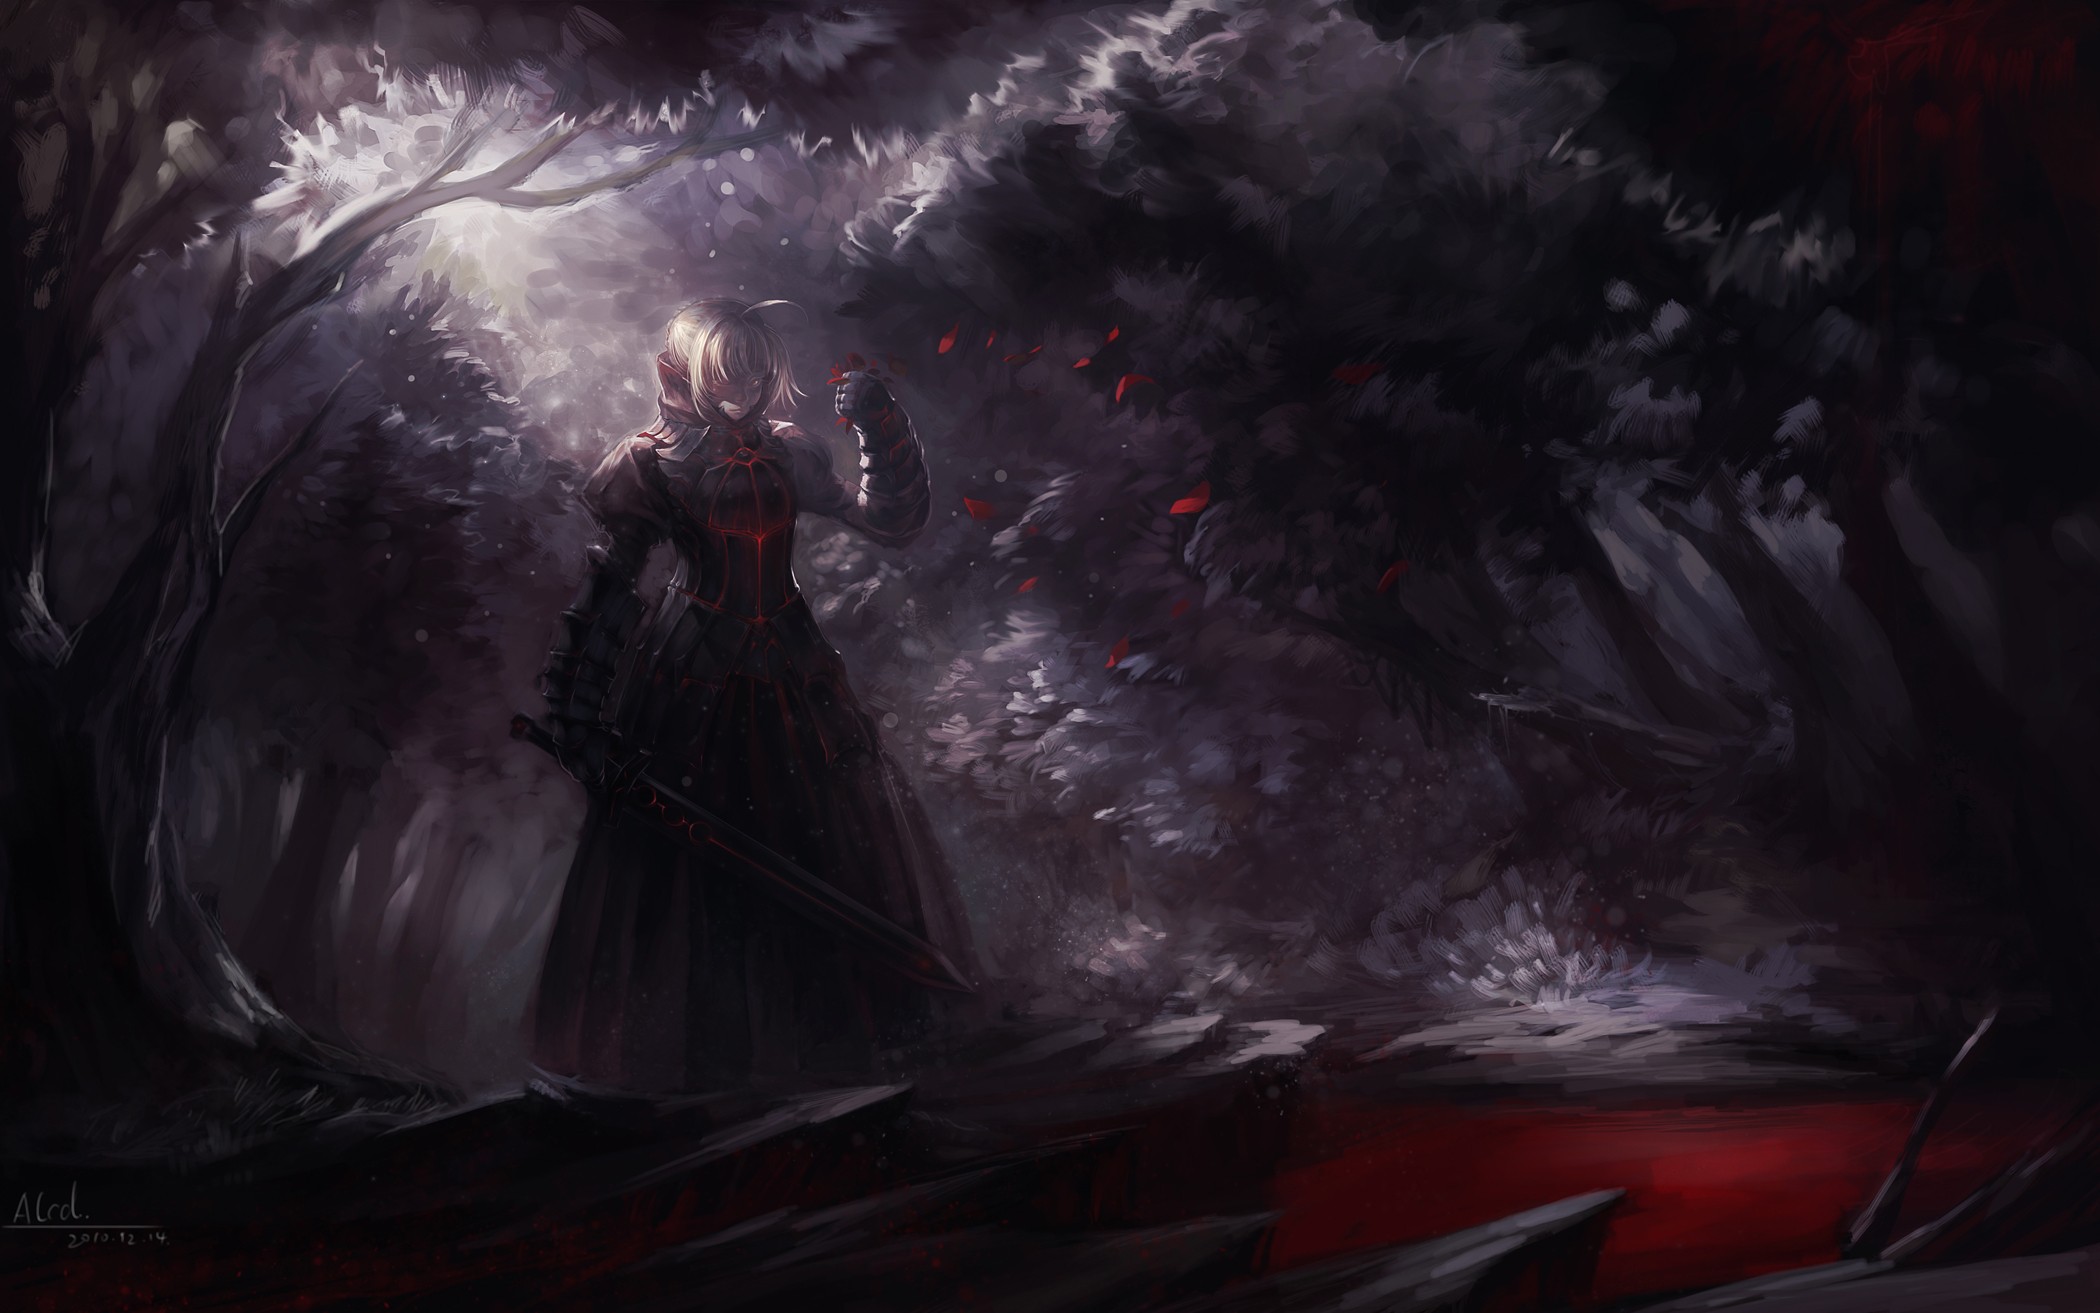 Anime 2100x1313 anime anime girls Fate series Saber Alter Fate/Stay Night fantasy art alcd 2D black armor female warrior ahoge long hair red petals women with swords Excalibur fate/stay night: heaven's feel forest Artoria Pendragon hair in face armor fan art